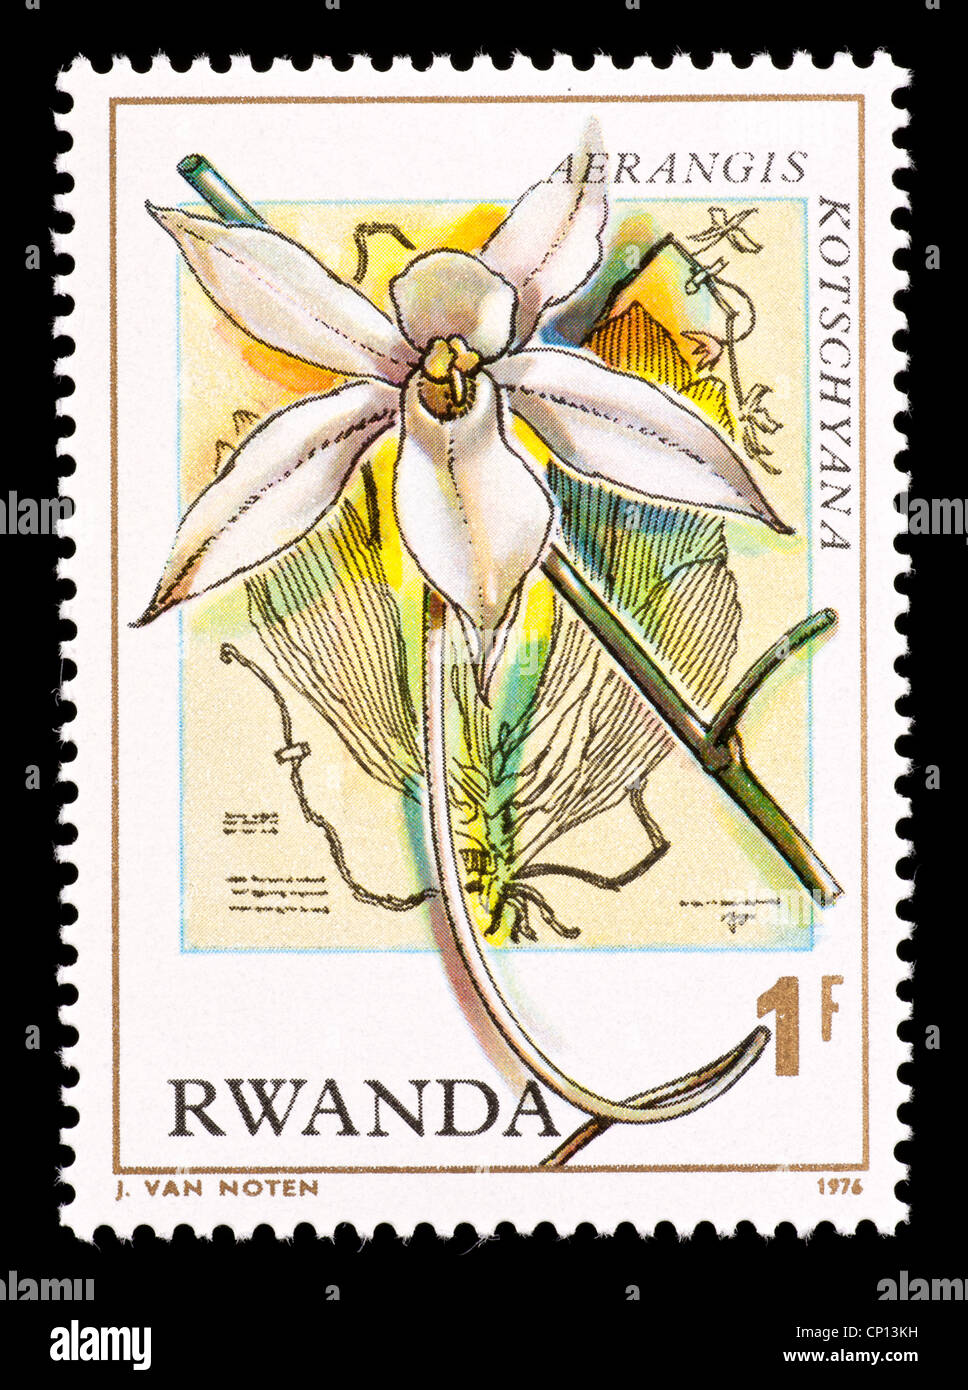 Postage stamp from Rwanda depicting an orchid (Aerangis kotschyana) Stock Photo